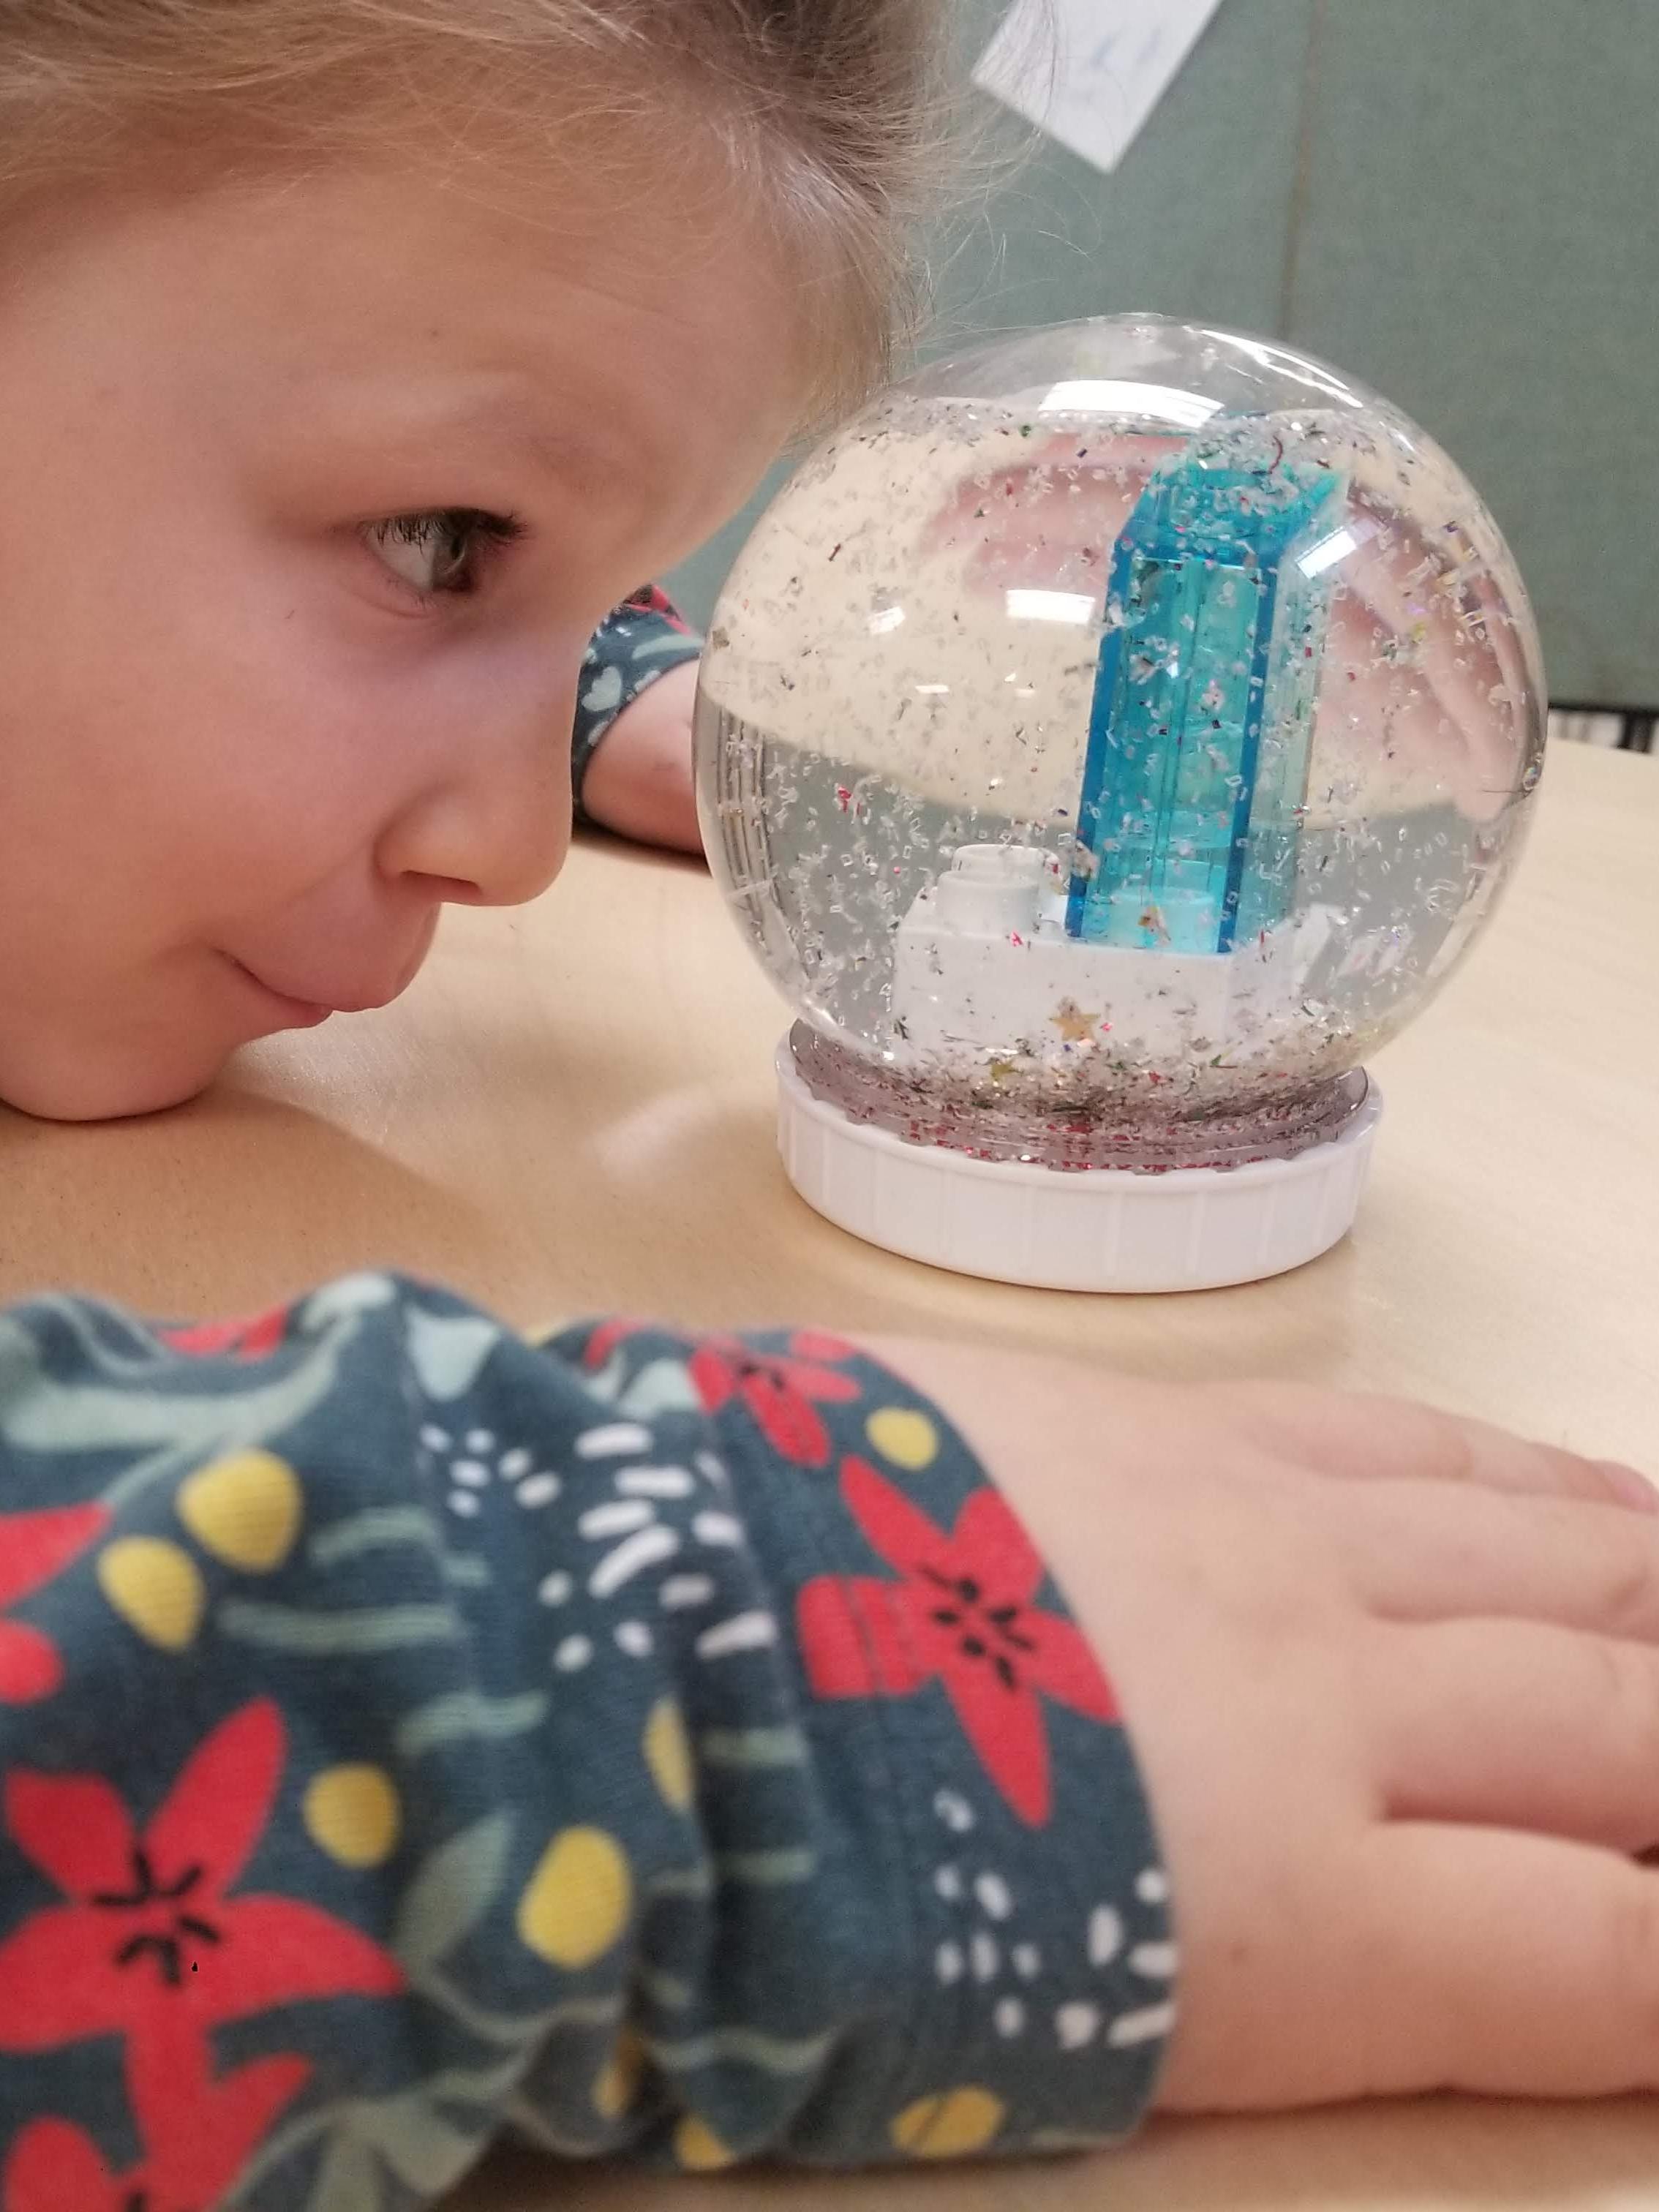 A Pre-k storytime kid marvels at her creation: a snow globe filled with sparkly glitter and a repurposed Duplo brick!